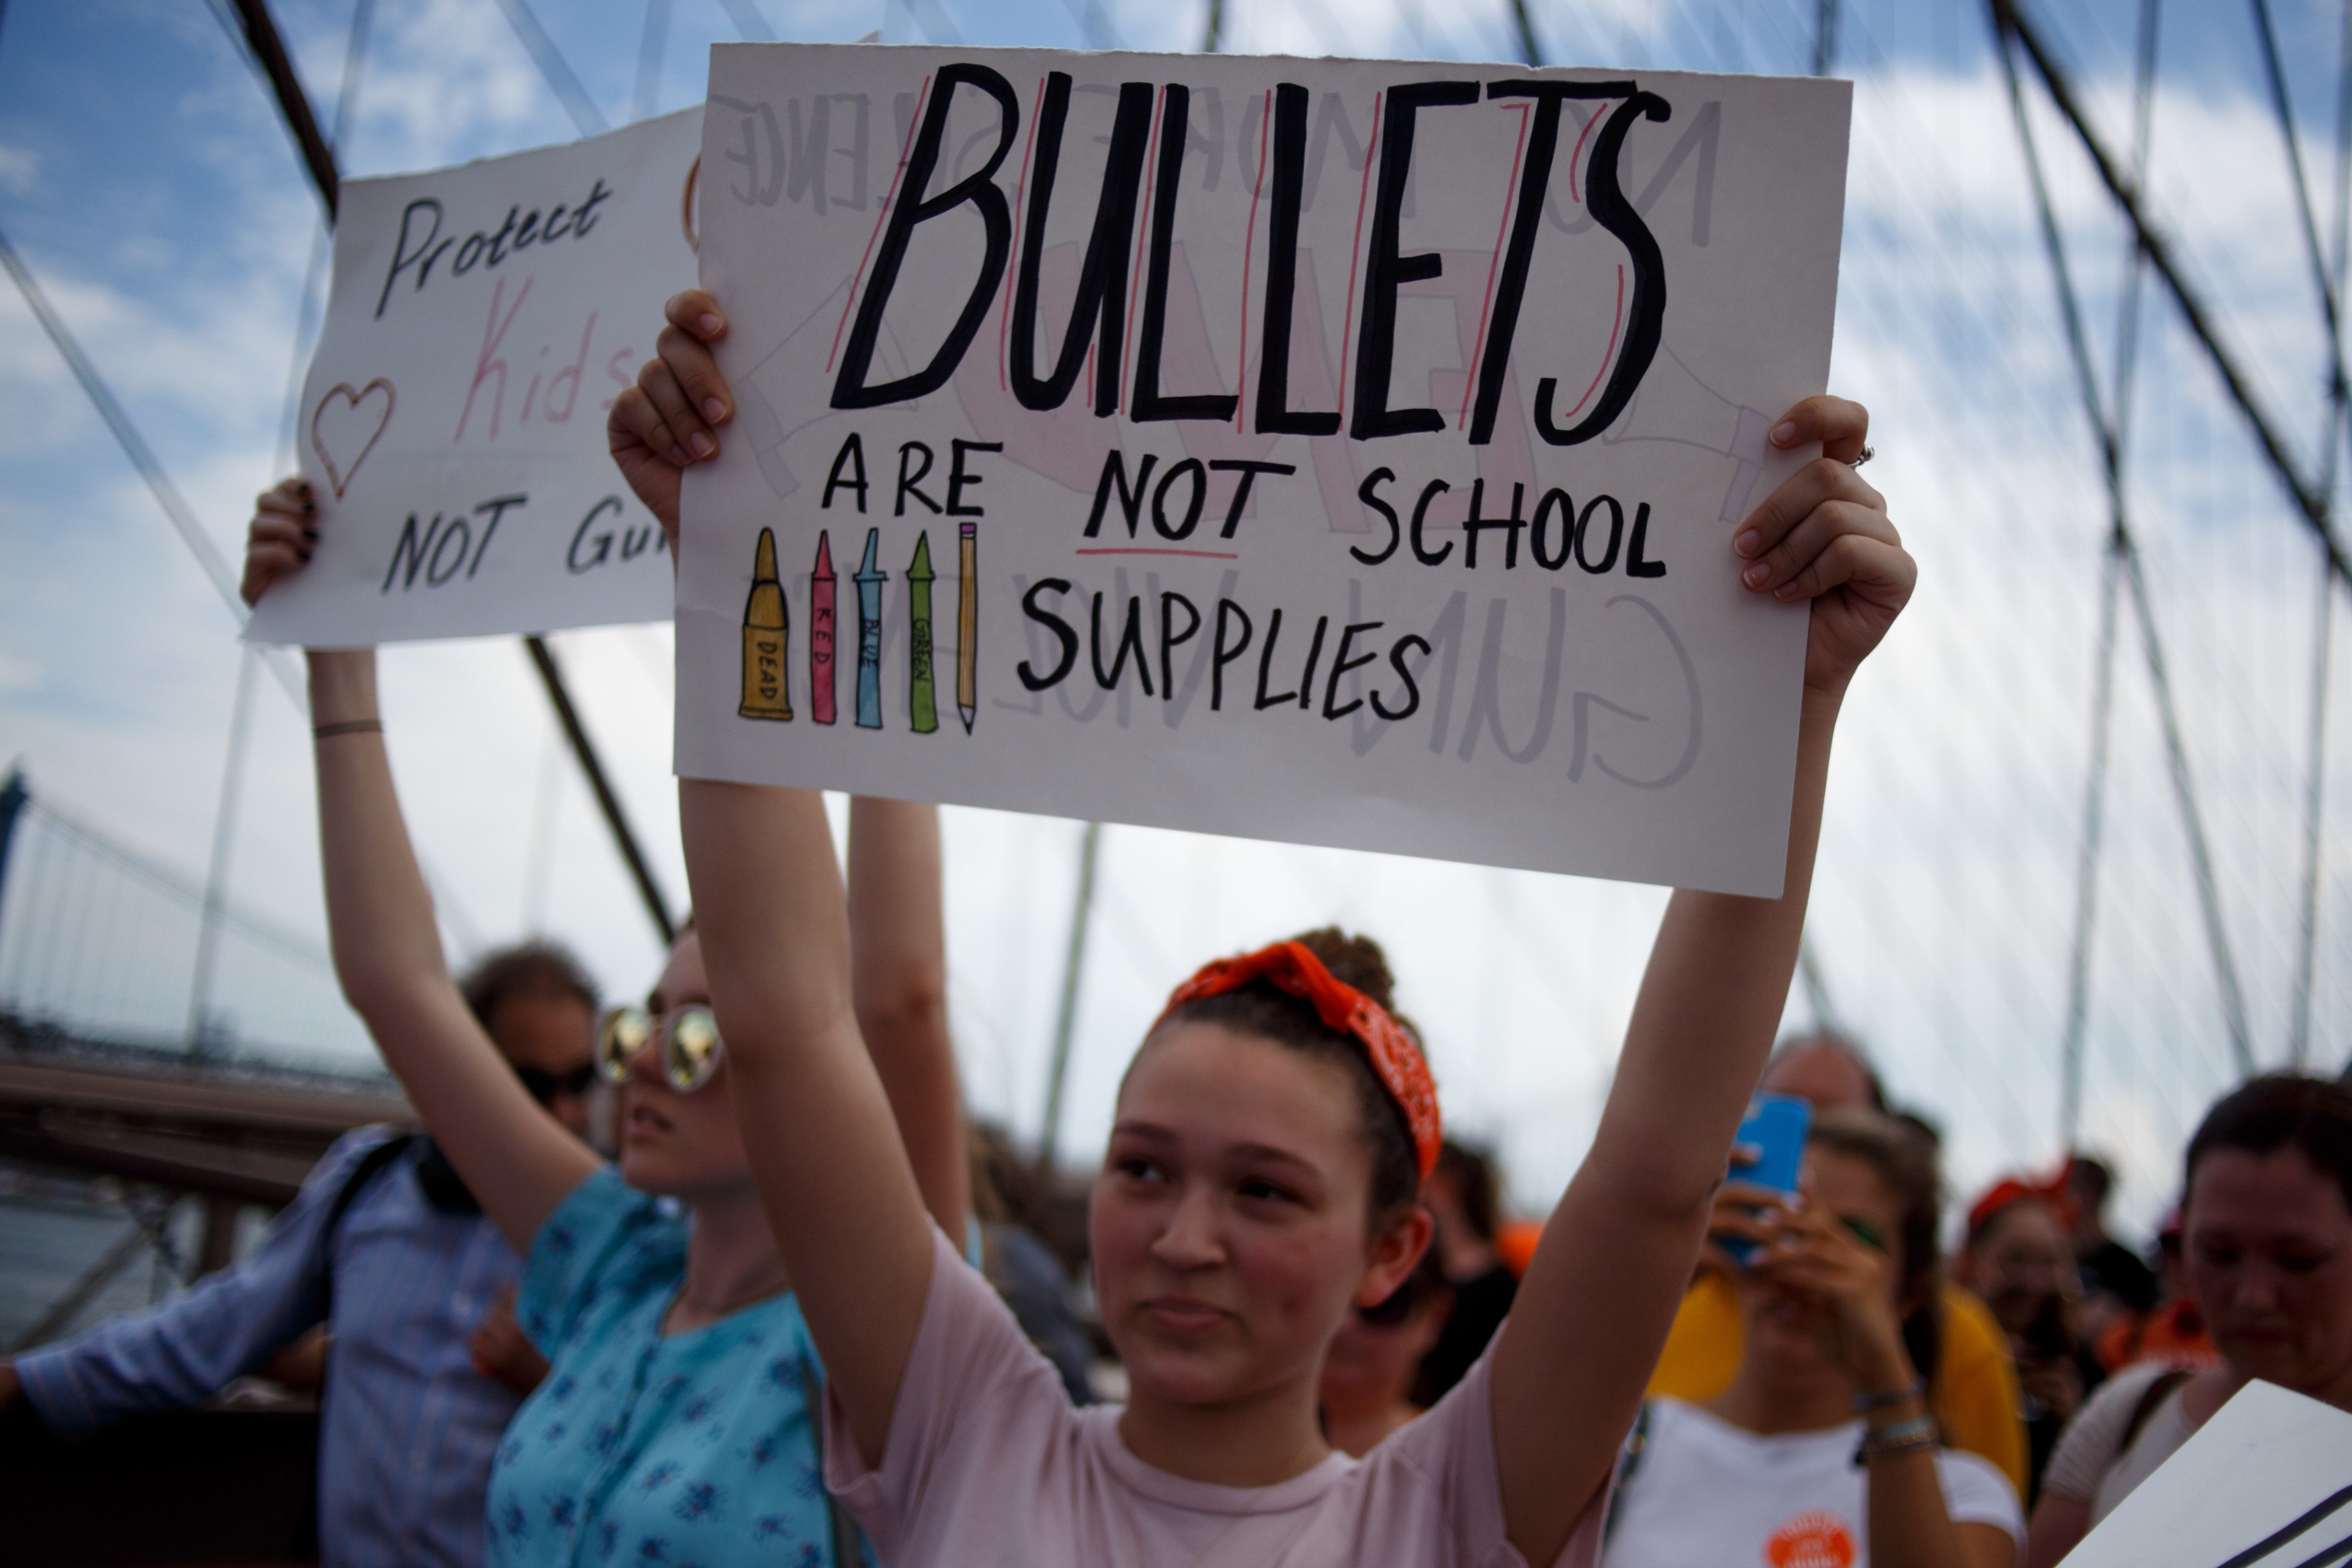 Activists seeking an end to gun violence in American schools and society participate in the Youth Over Guns March, crossing the Brooklyn Bridge into Manhattan. (Michael Candelori—Pacific Press/LightRocket/Getty Images)